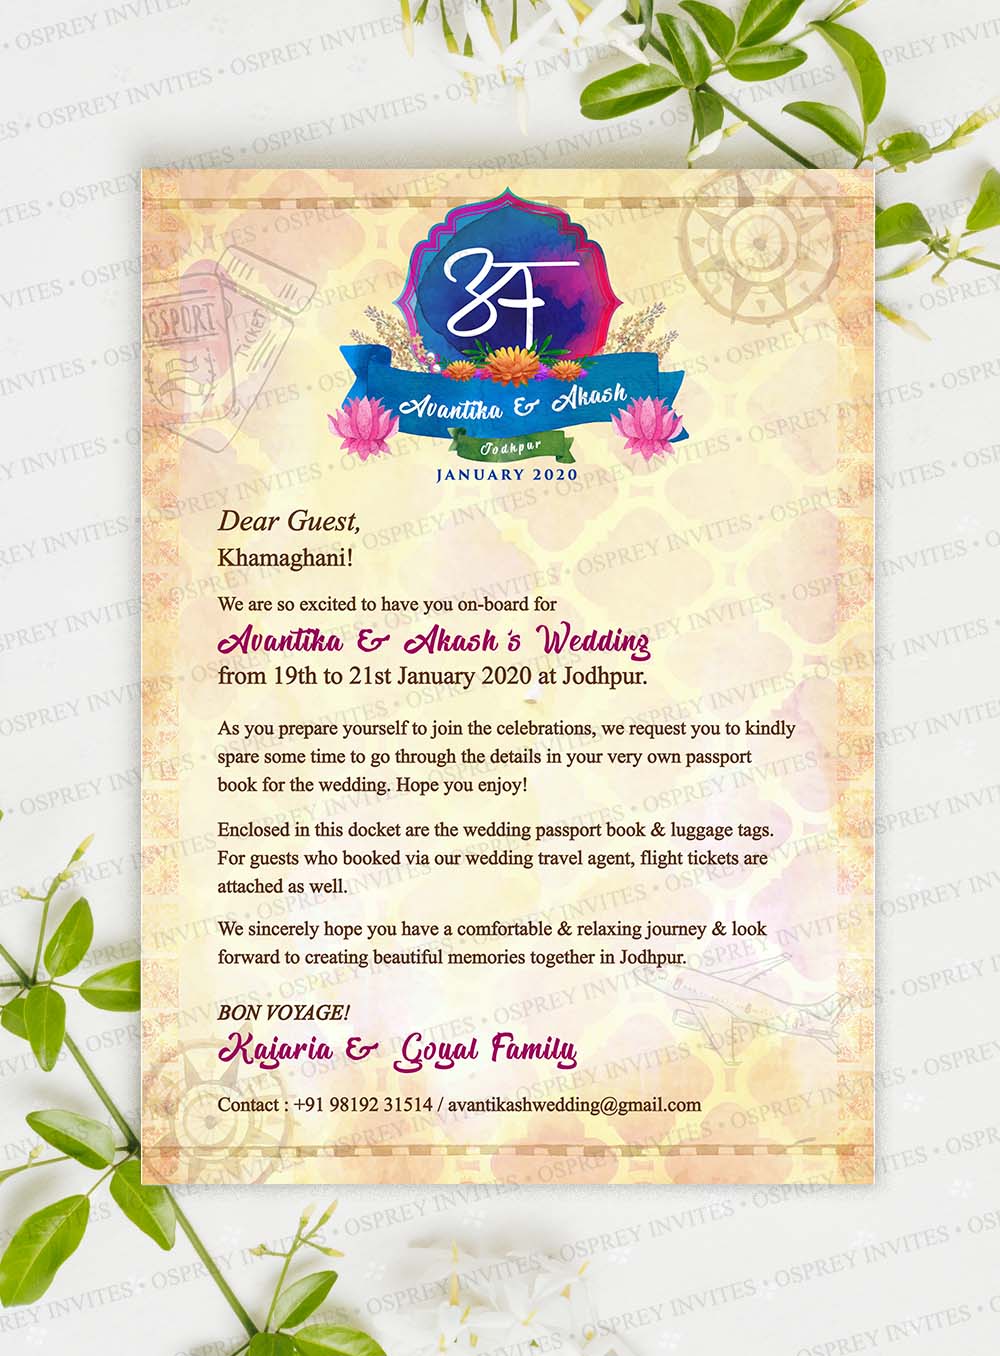 " A one of kind Wedding Welcome Letter with Rustic Theme and Floral Elements to add in Wedding Stationery Collection or Guest Welcome Kit"